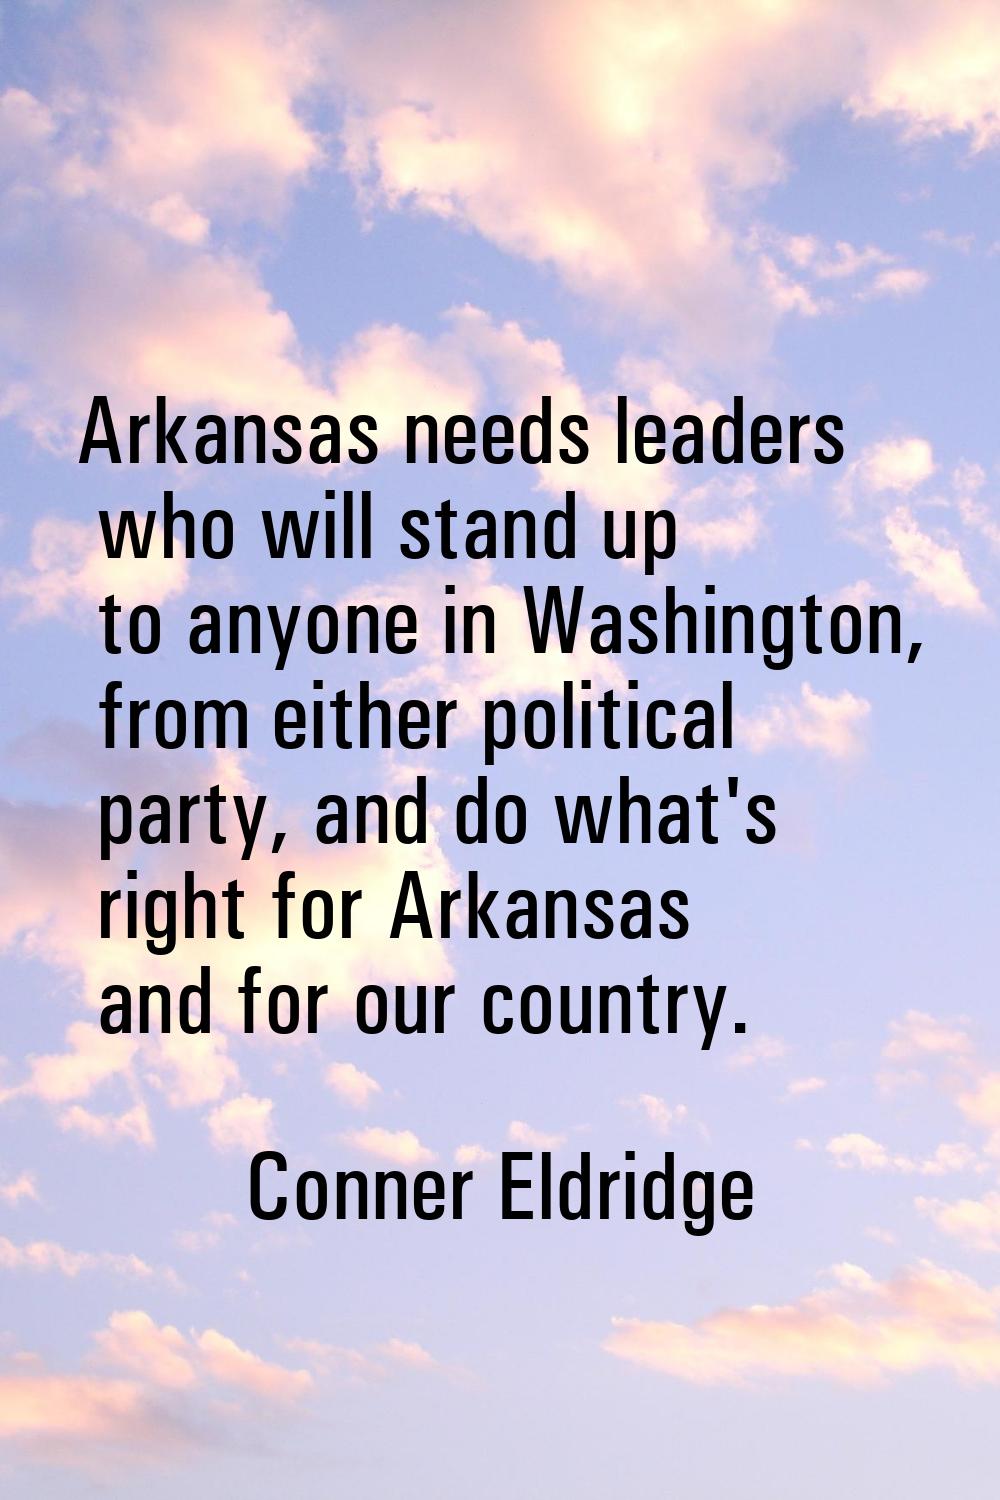 Arkansas needs leaders who will stand up to anyone in Washington, from either political party, and 